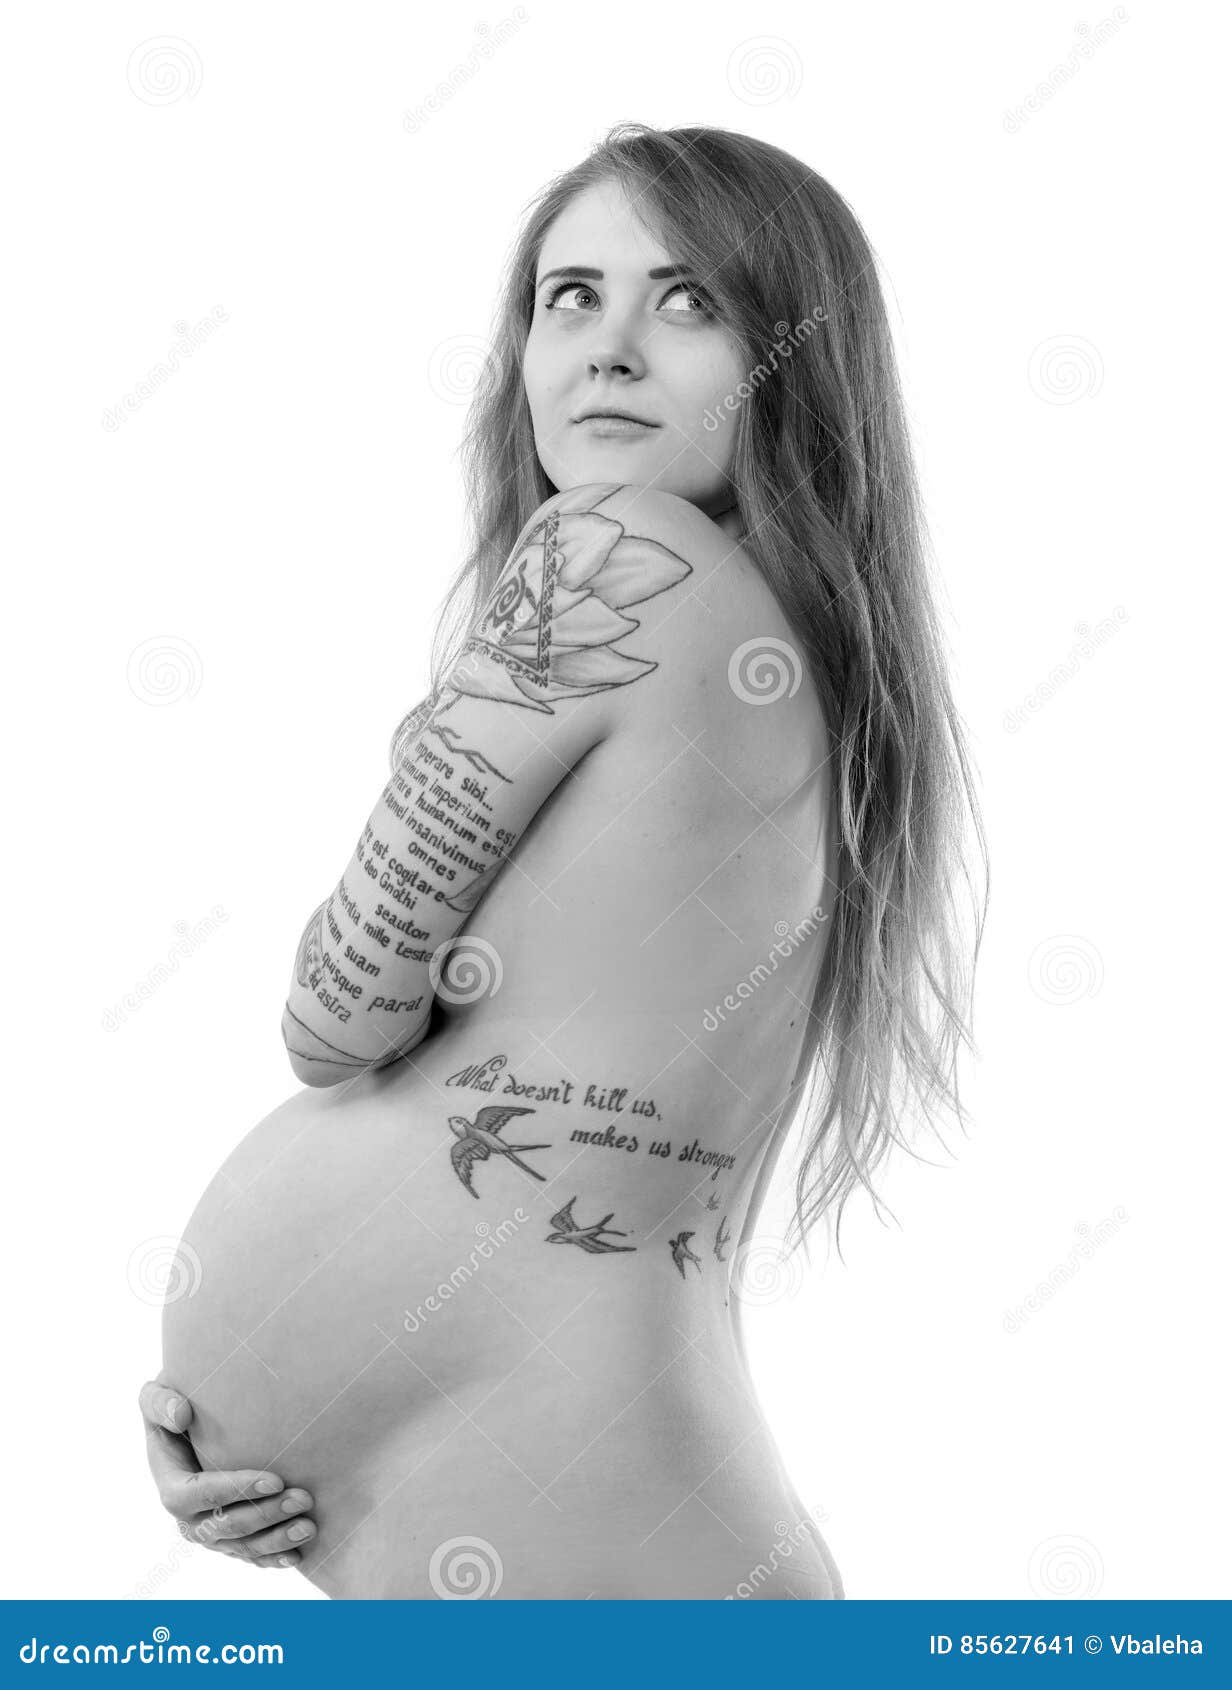 Black And White Nudes Pregnant - Pregnant nude woman stock image. Image of female, maternity - 85627641